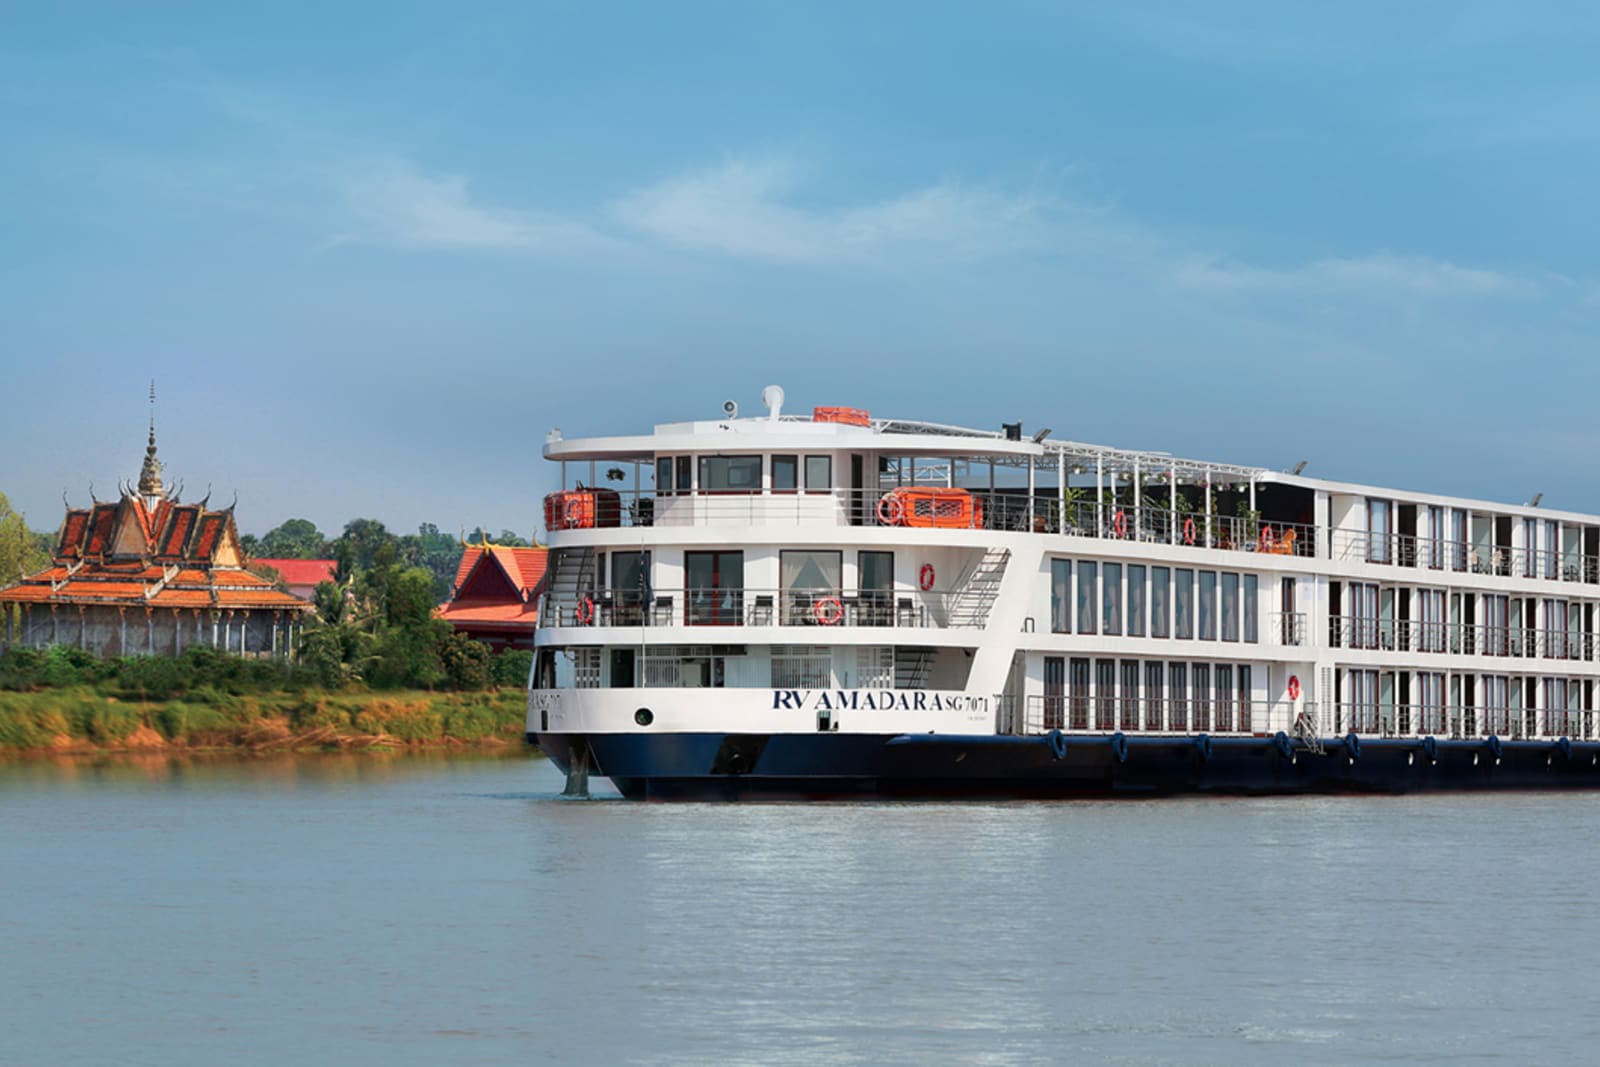 An AmaWaterways river cruise ship on the Mekong